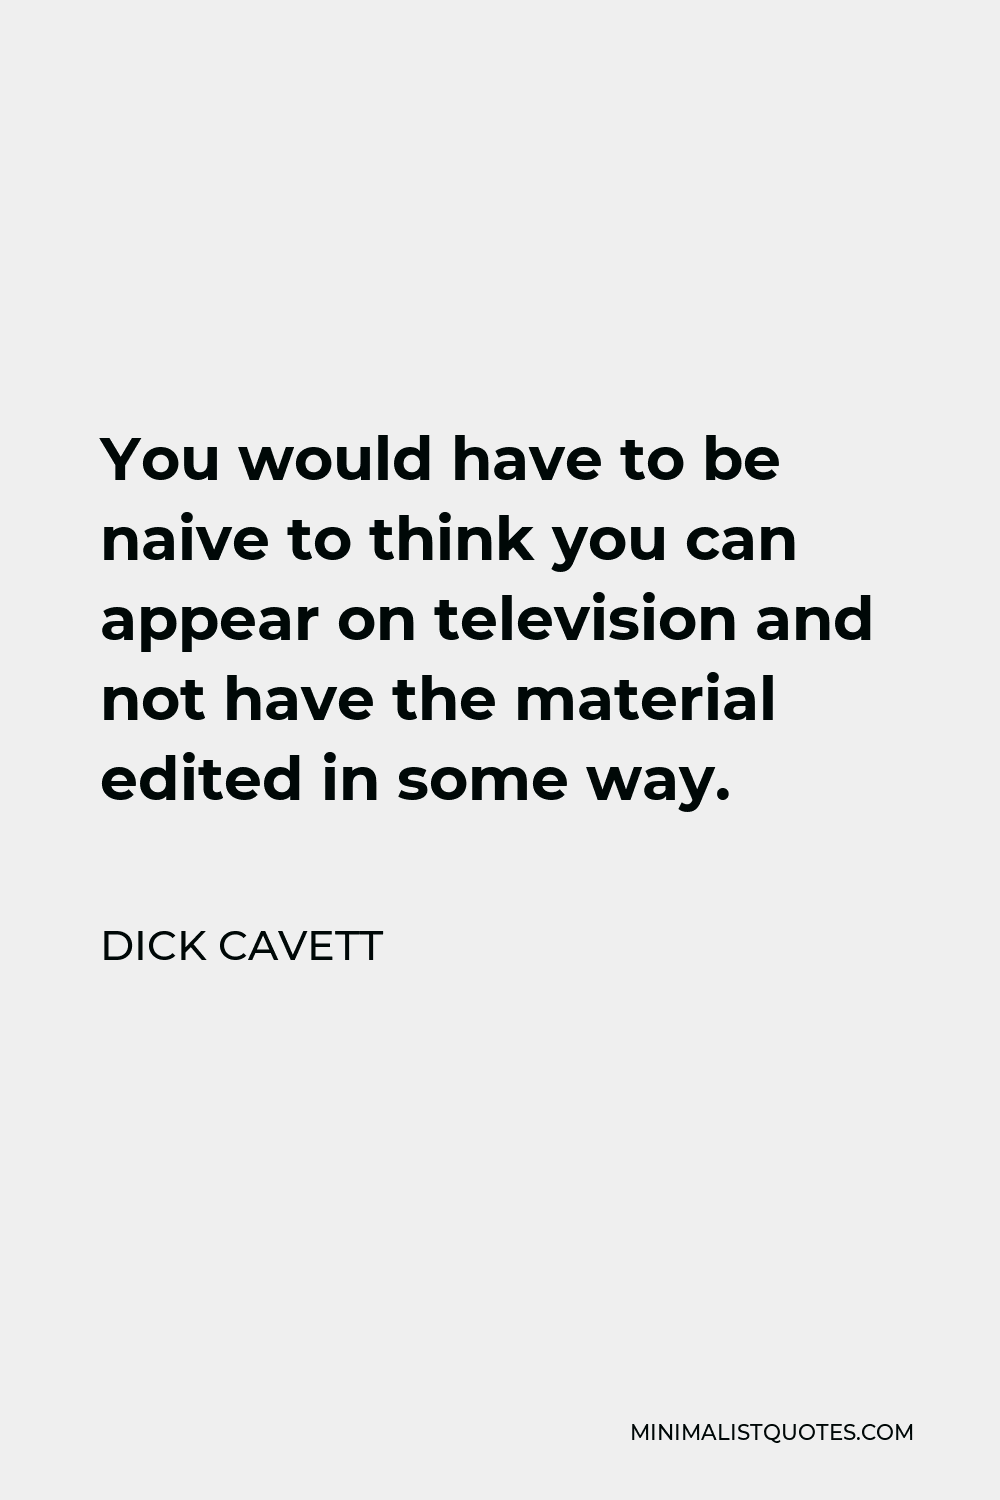 Dick Cavett Quote - You would have to be naive to think you can appear on television and not have the material edited in some way.